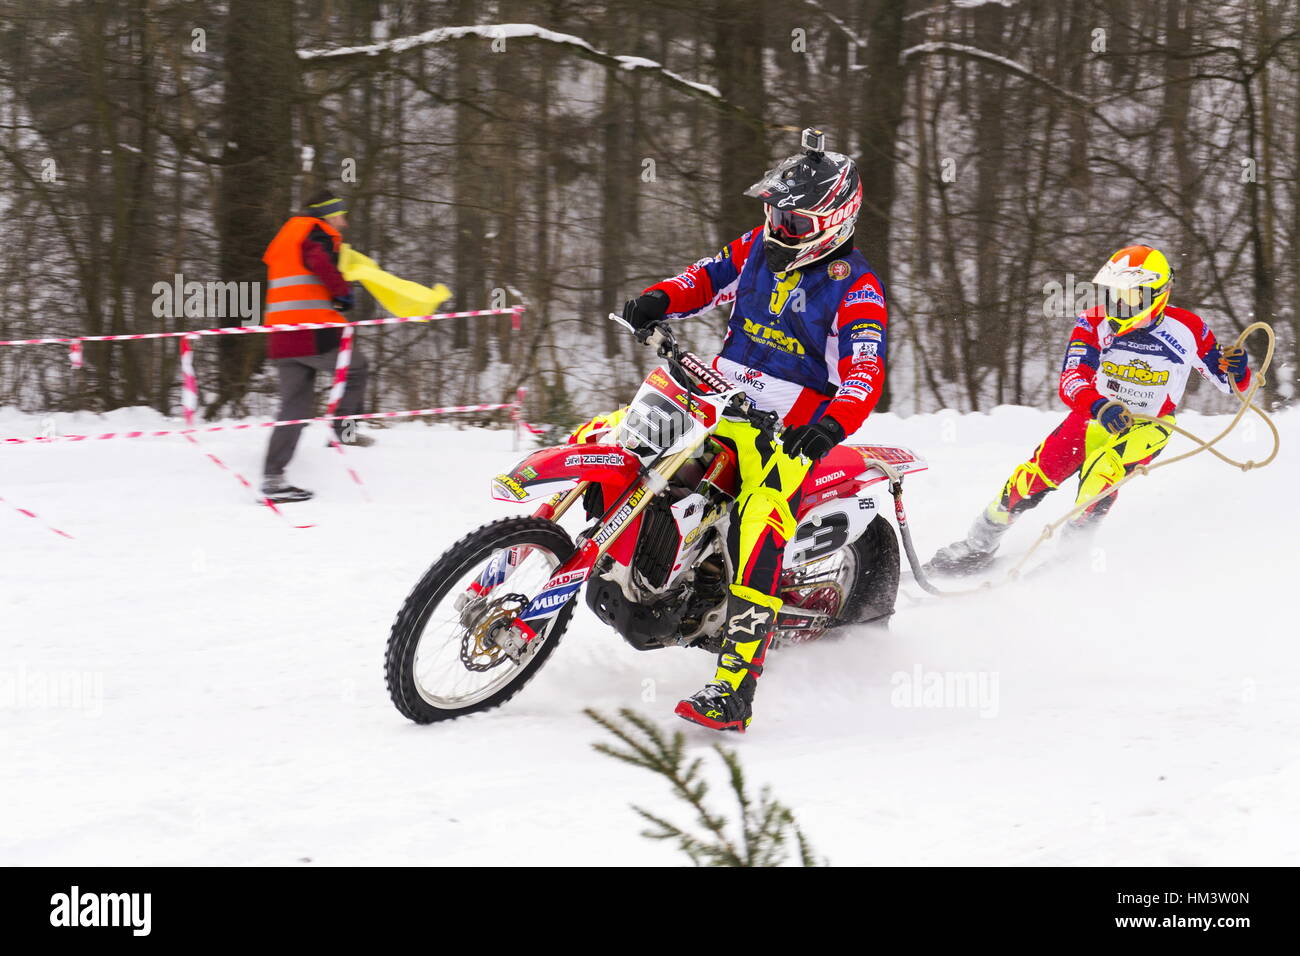 Motorcycle skijoring racers ride on track of Czech championship competition on January 29, 2017 in Klasterec nad Orlici, Czech republic. Stock Photo